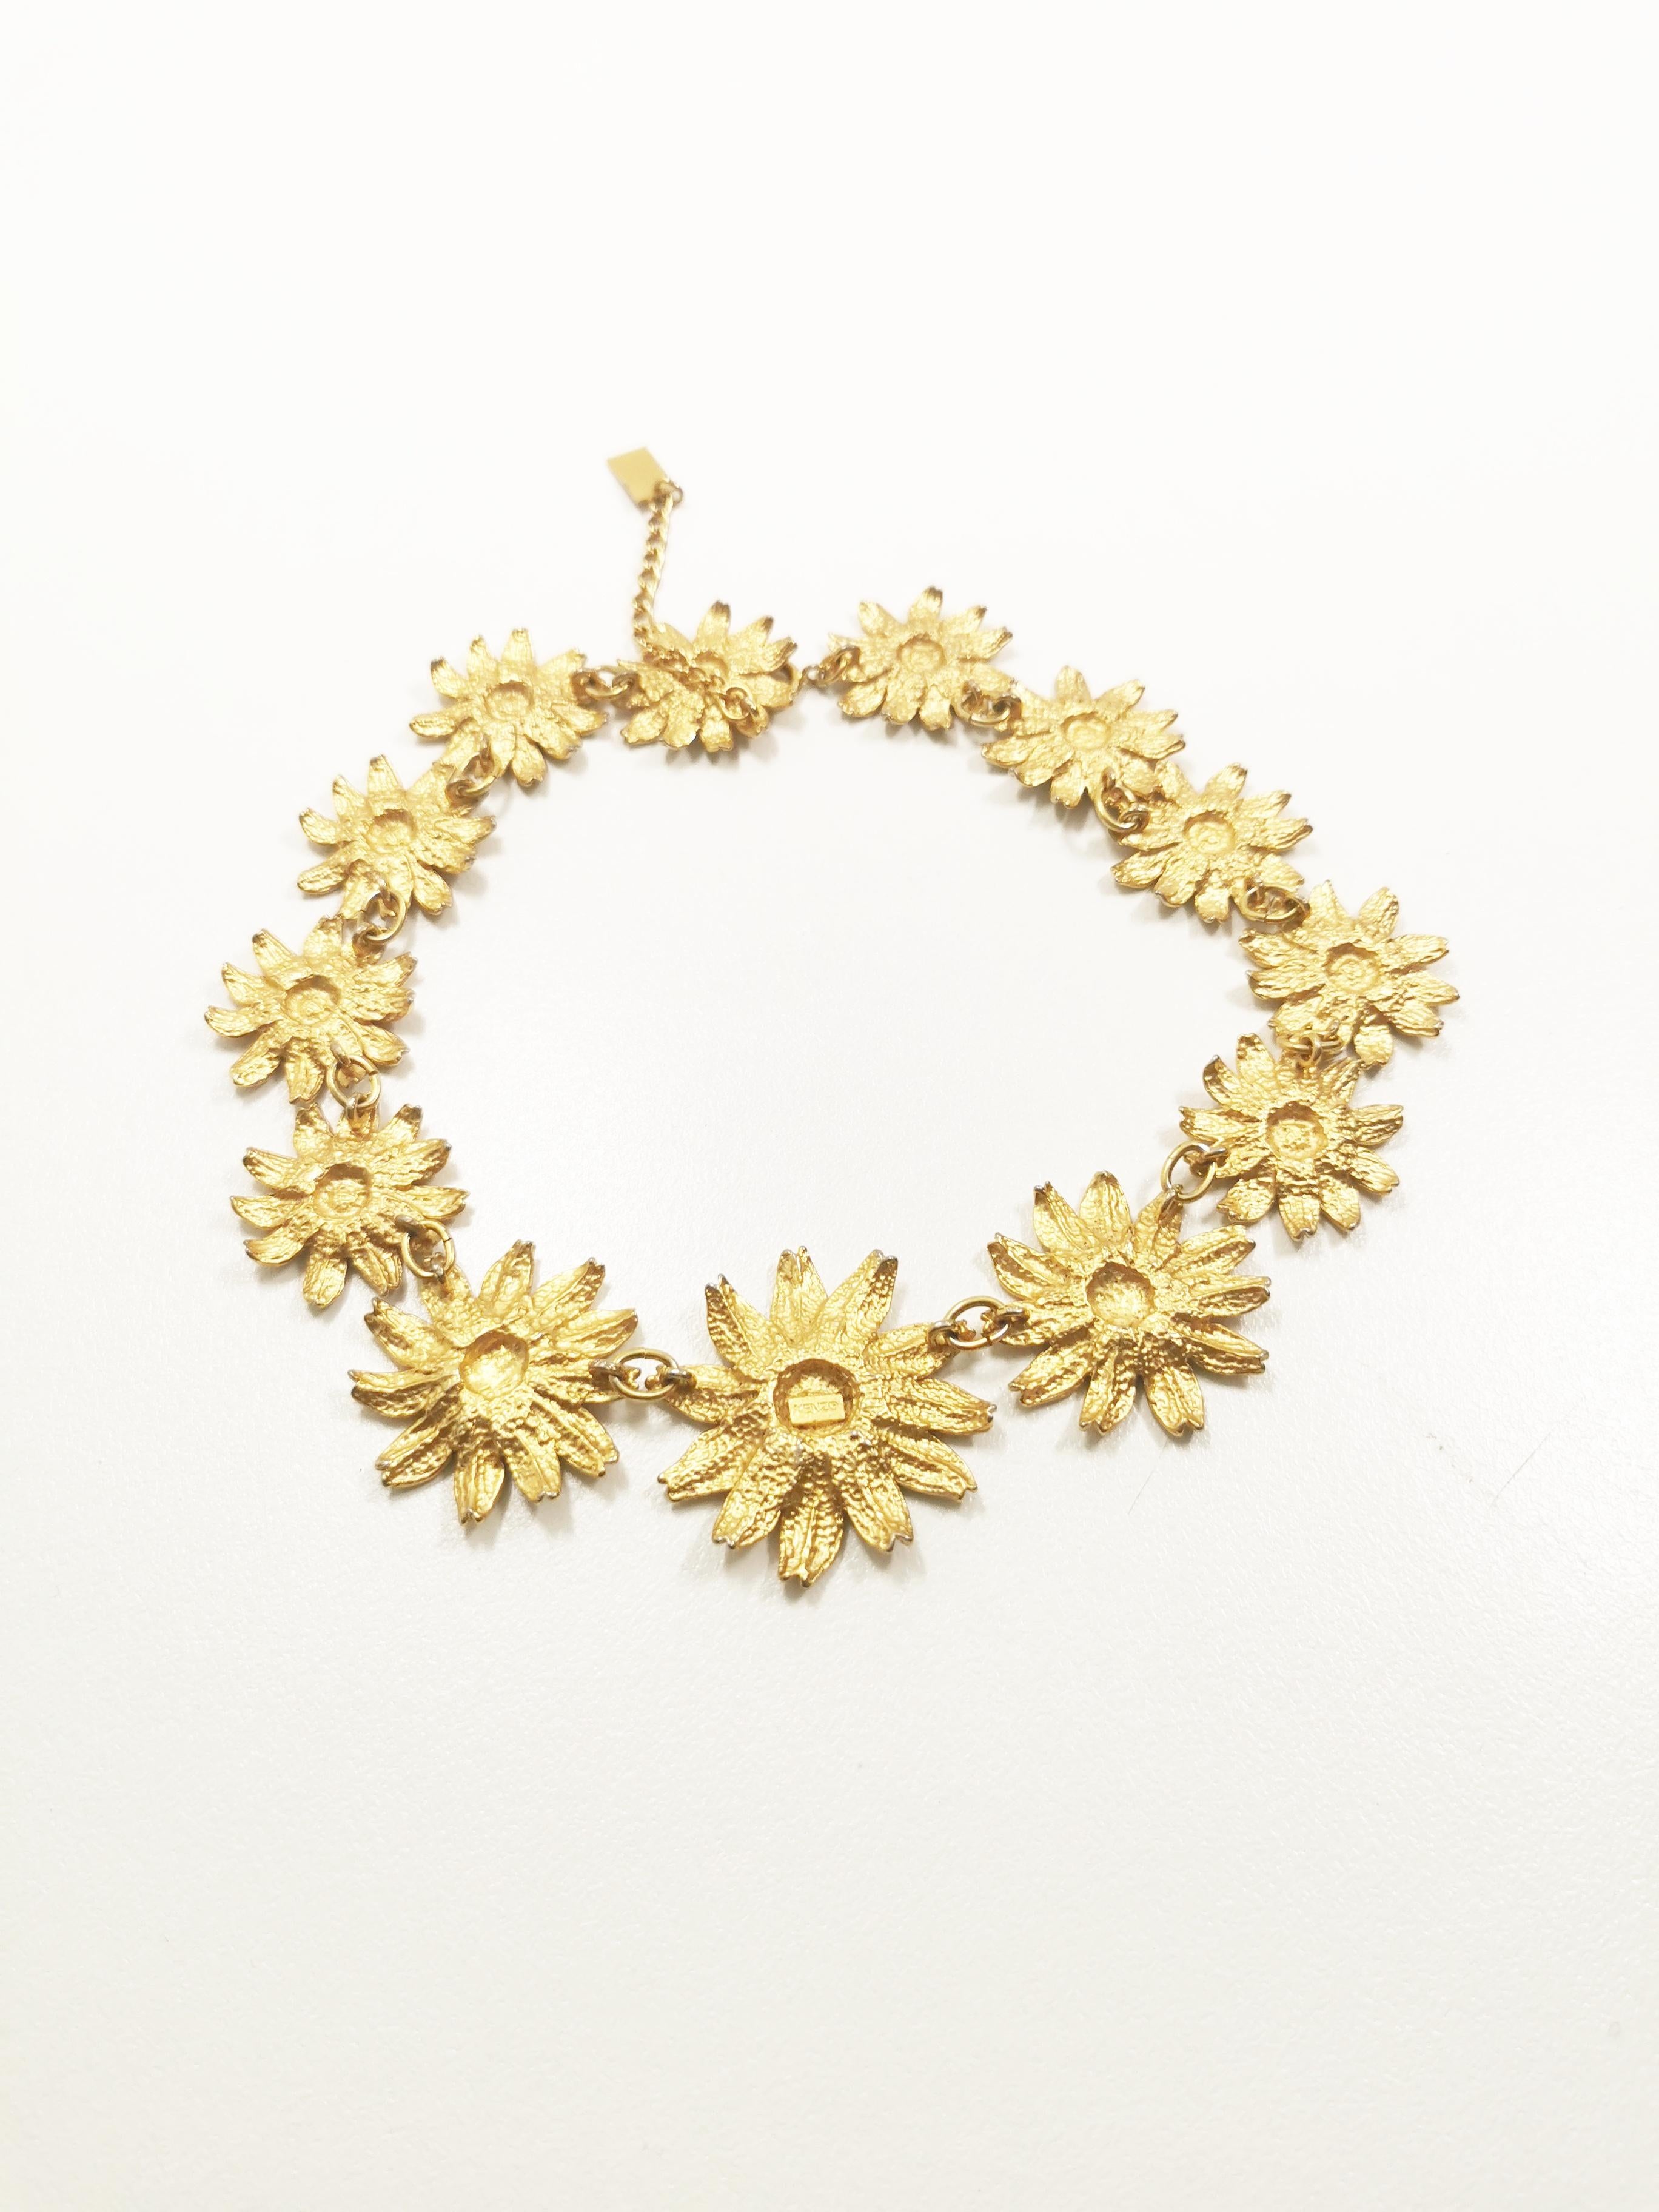 Indulge in the allure of nostalgic glamour with the Vintage KENZO Gerbera Flower Choker, a statement piece that seamlessly marries the romance of yesteryear with the bold elegance of contemporary fashion.

This exquisite choker necklace is a